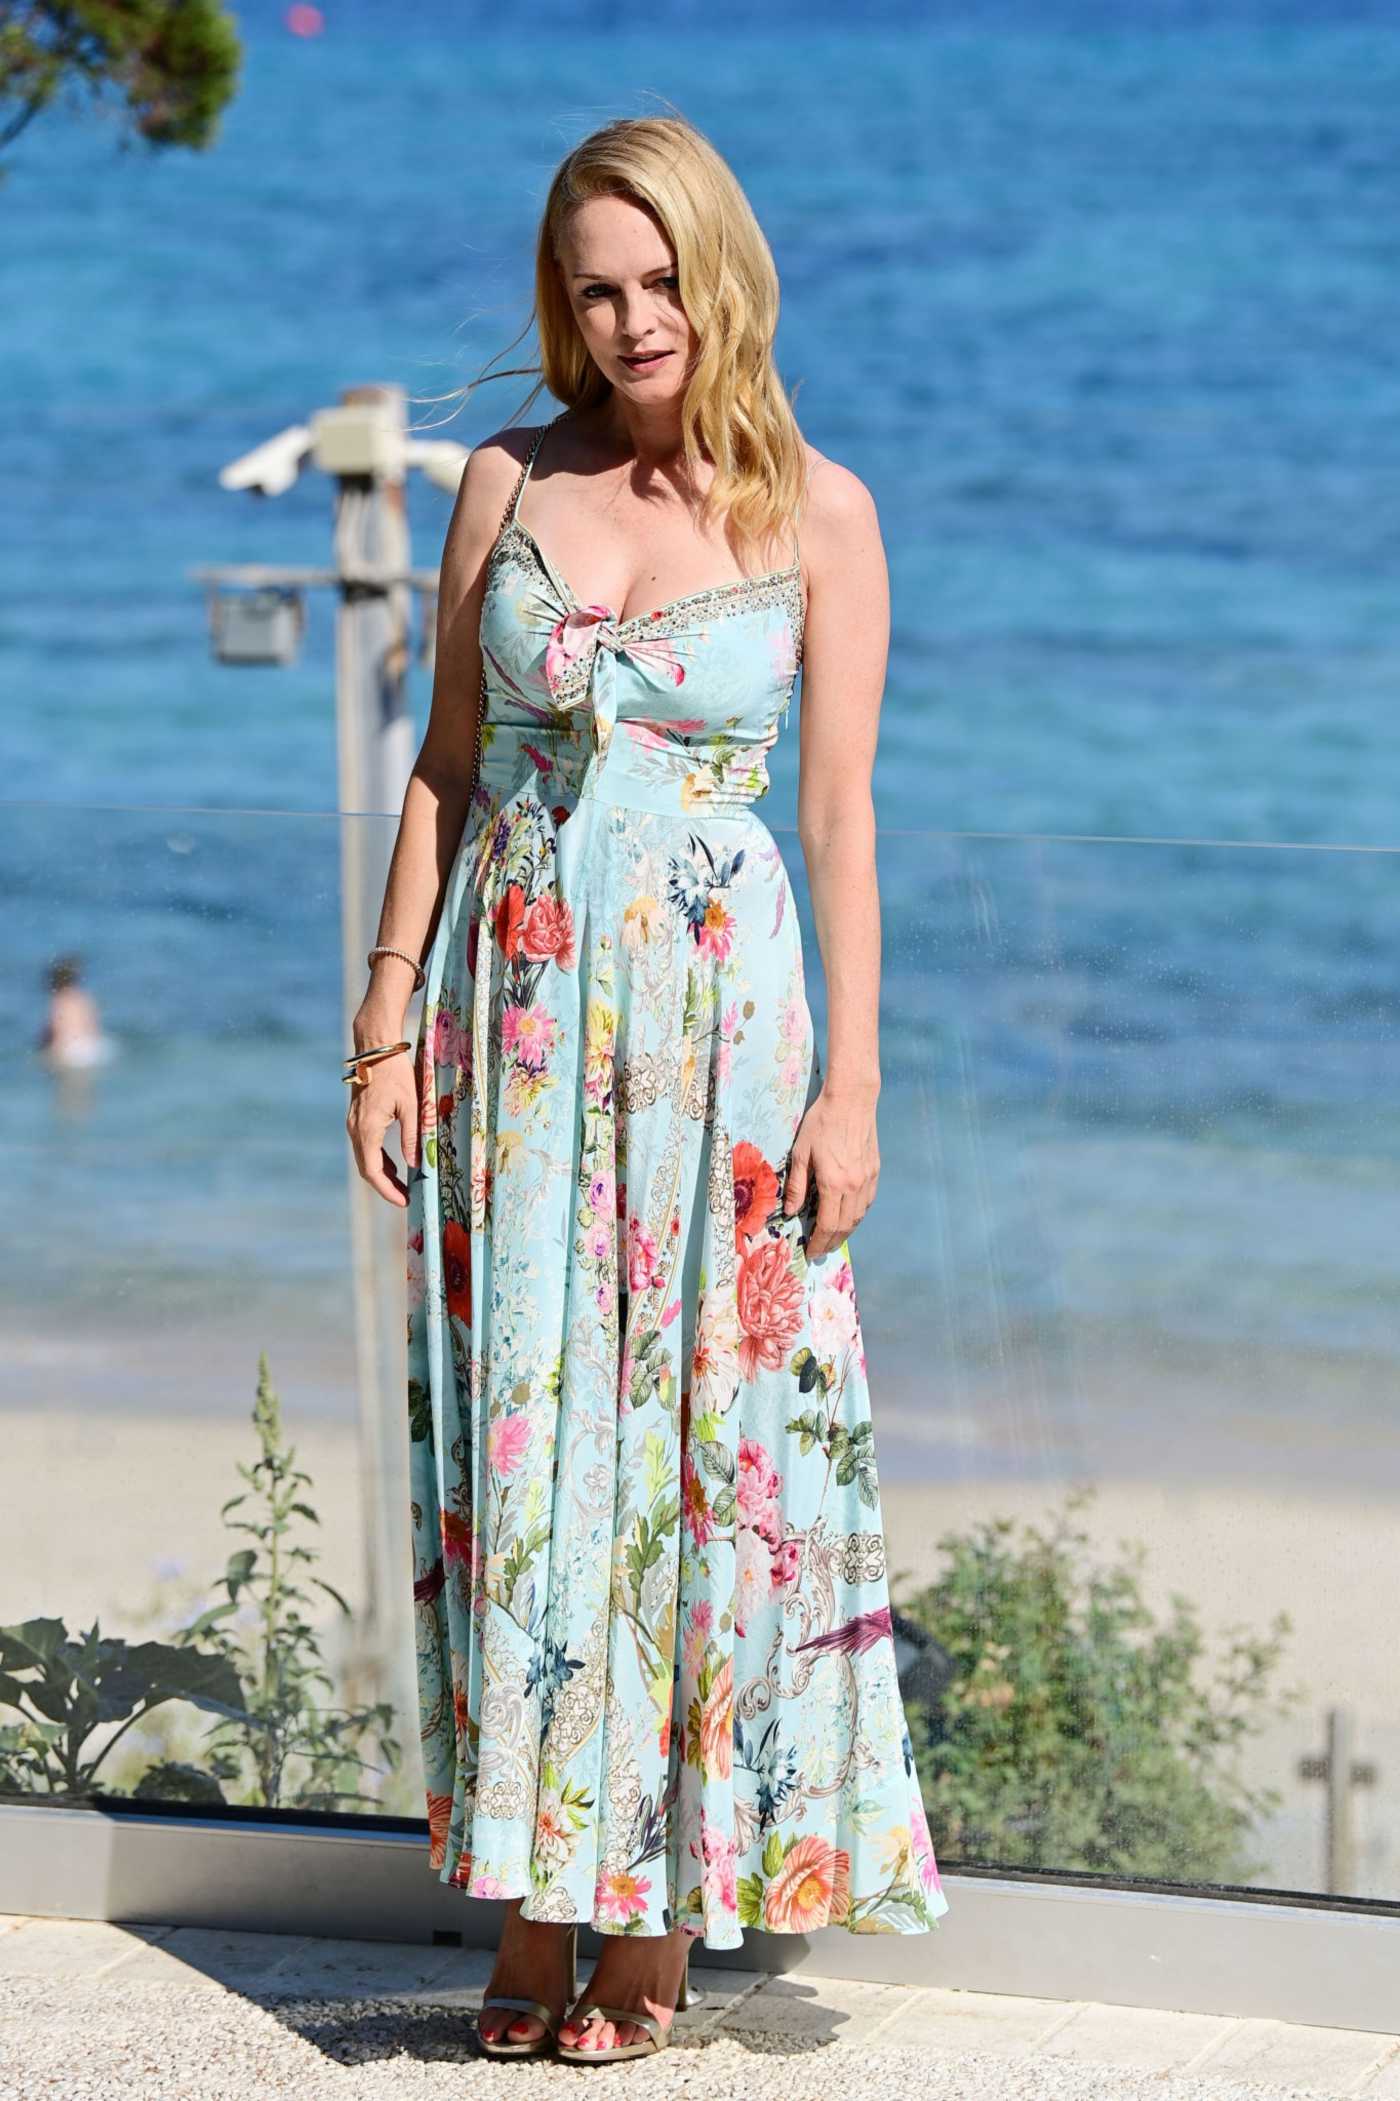 Heather Graham in a Baby Blue Floral Dress Attends 2021 Filming Italy Festival Day 2 at Forte Village Resort in Santa Margherita di Pula, Italy 07/23/2021